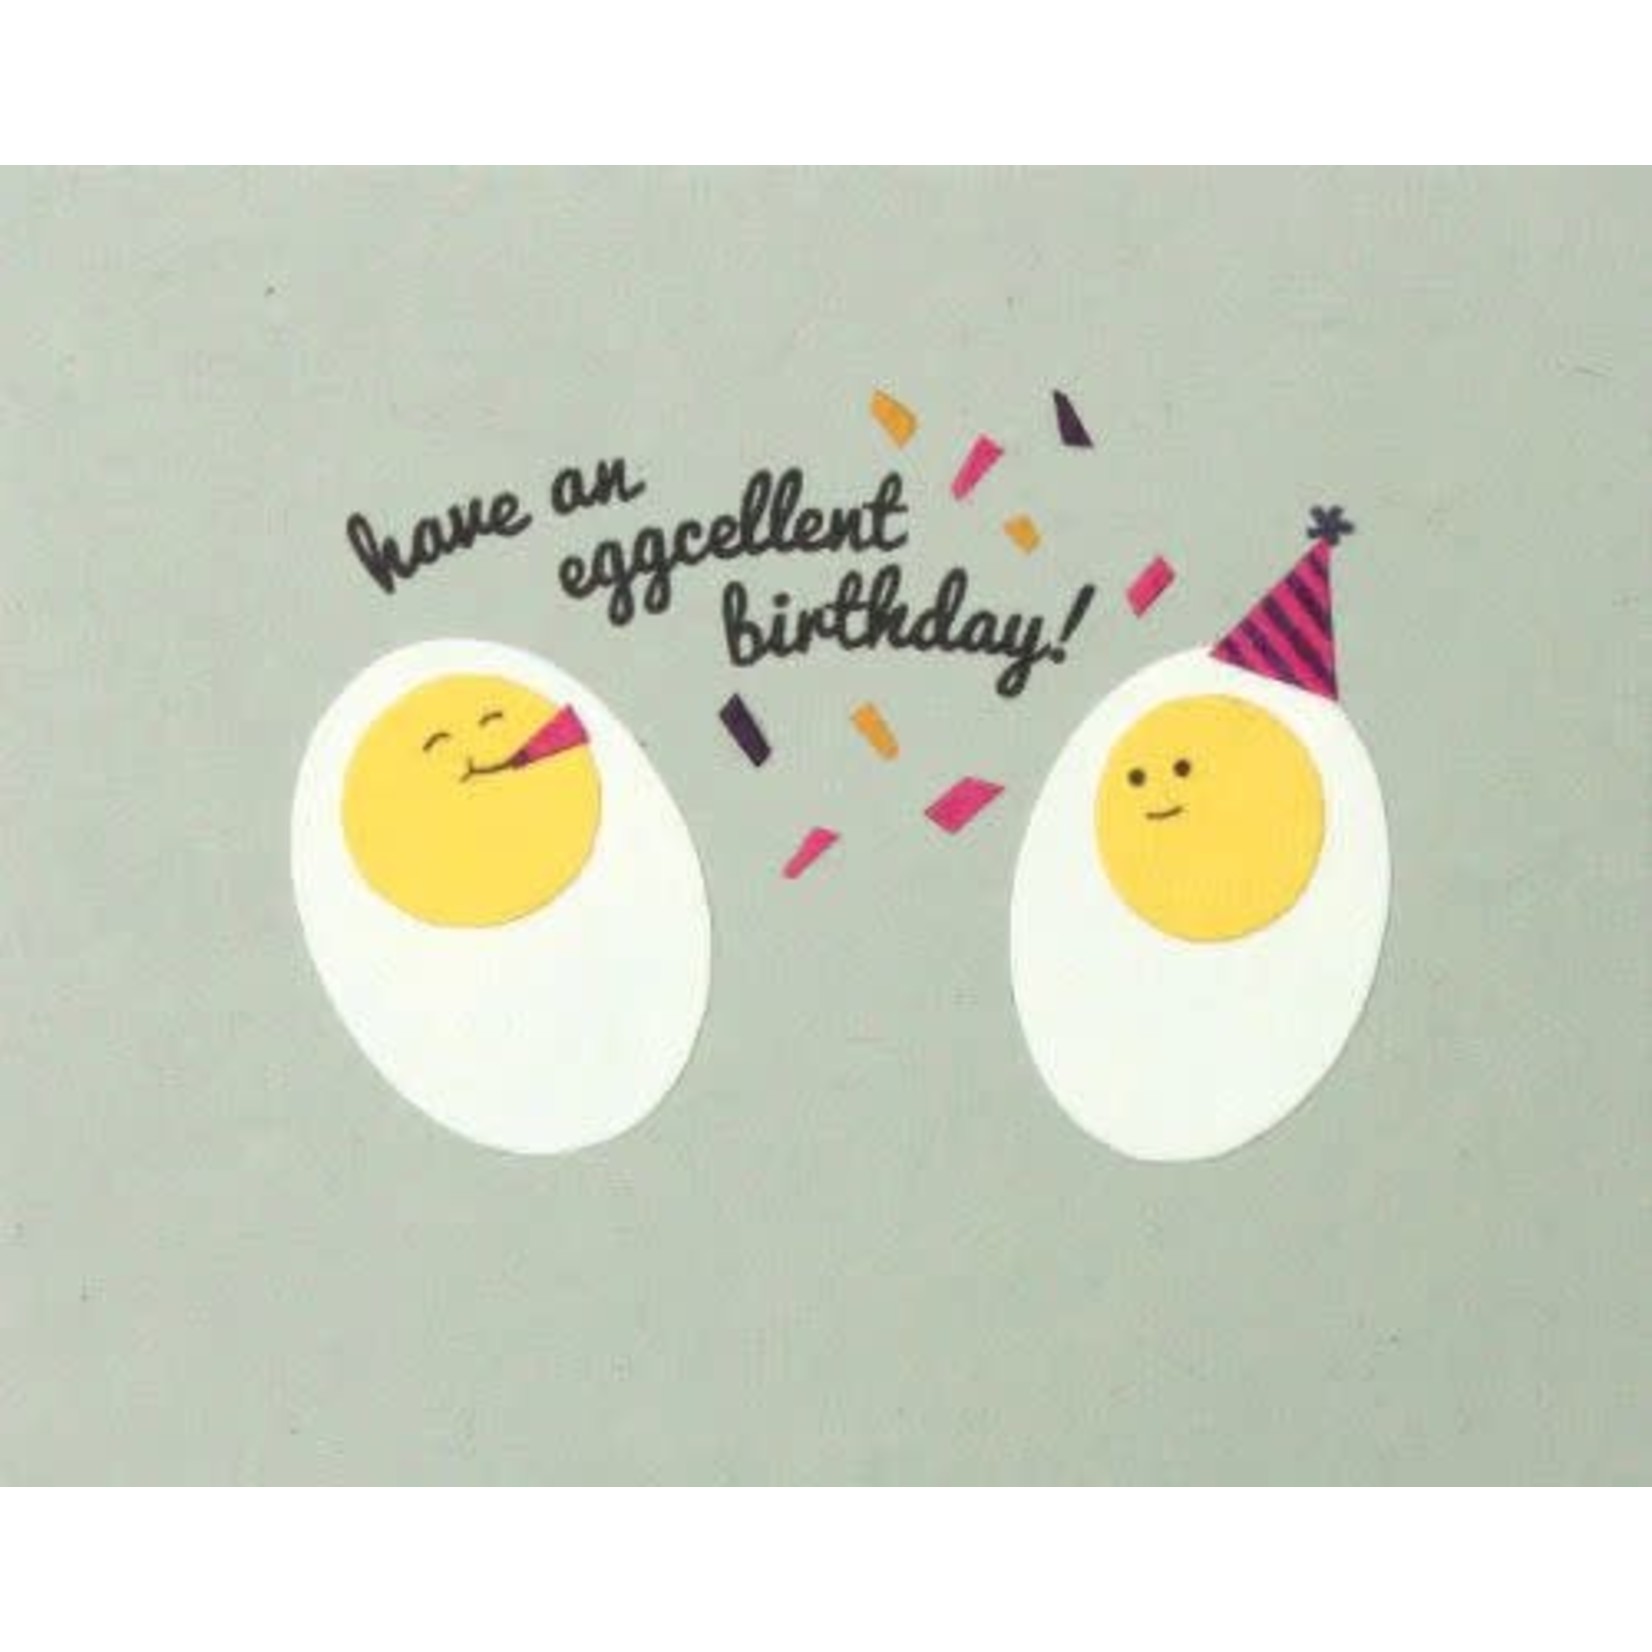 Philippines Eggcellent Birthday Greeting Card